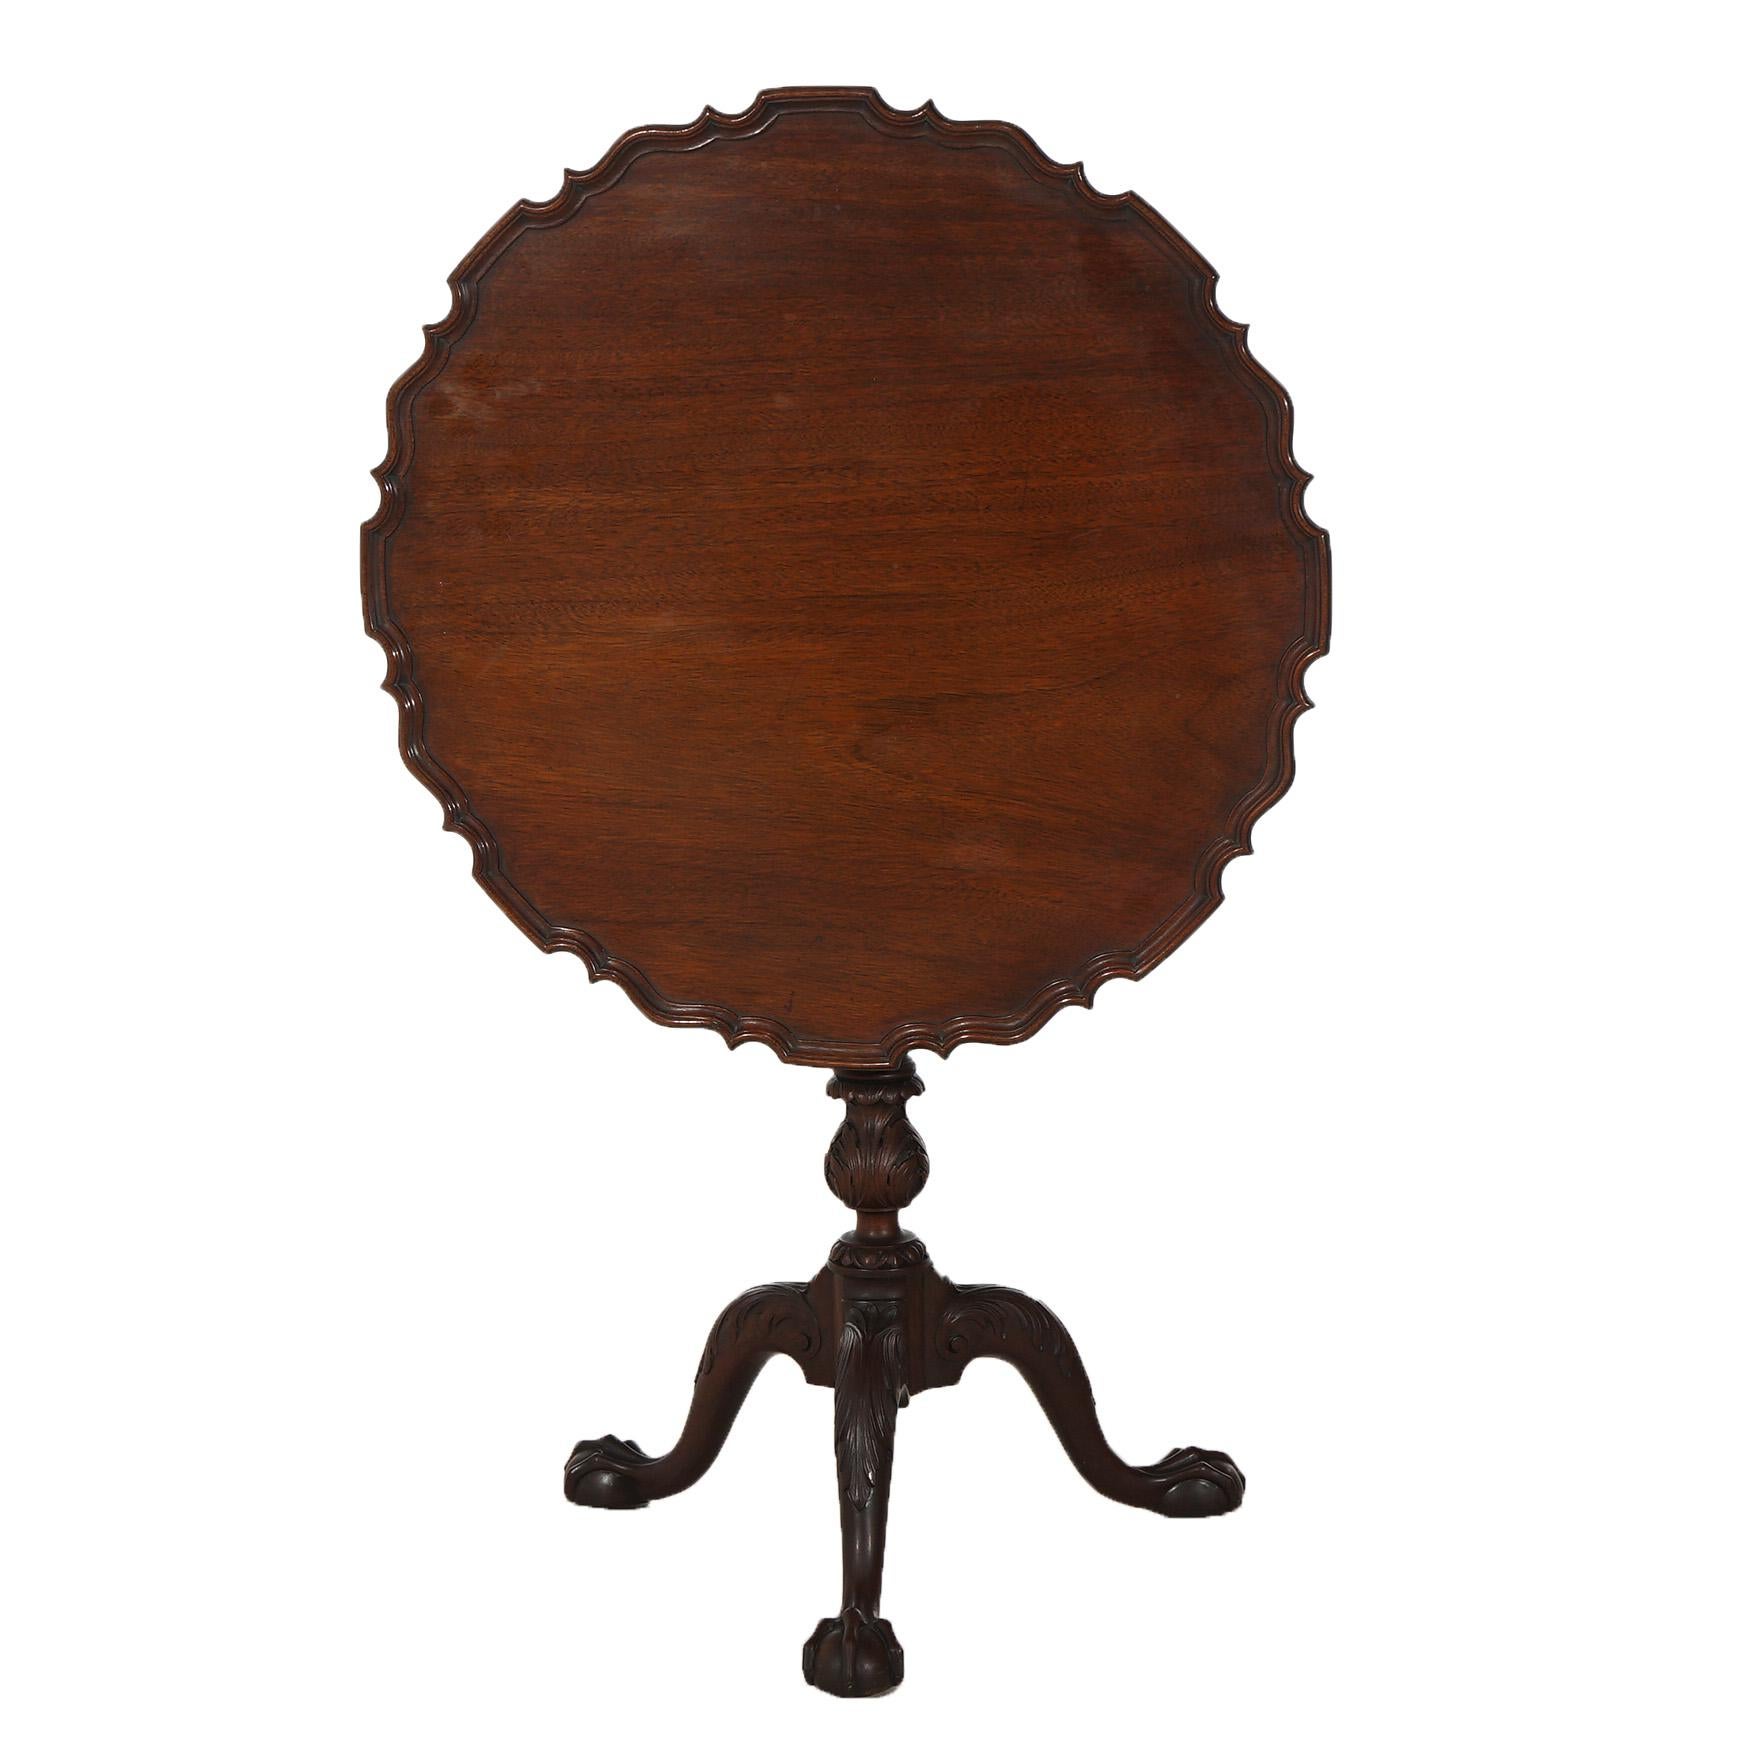 Antique Chippendale Carved Mahogany Pie Crust Tilt Top Table with Reeded Column and Carved Acanthus Cabriole Legs C1930

Measures- 28.25''H x 27.25''W x 27.25''D; 42.75'' H folded